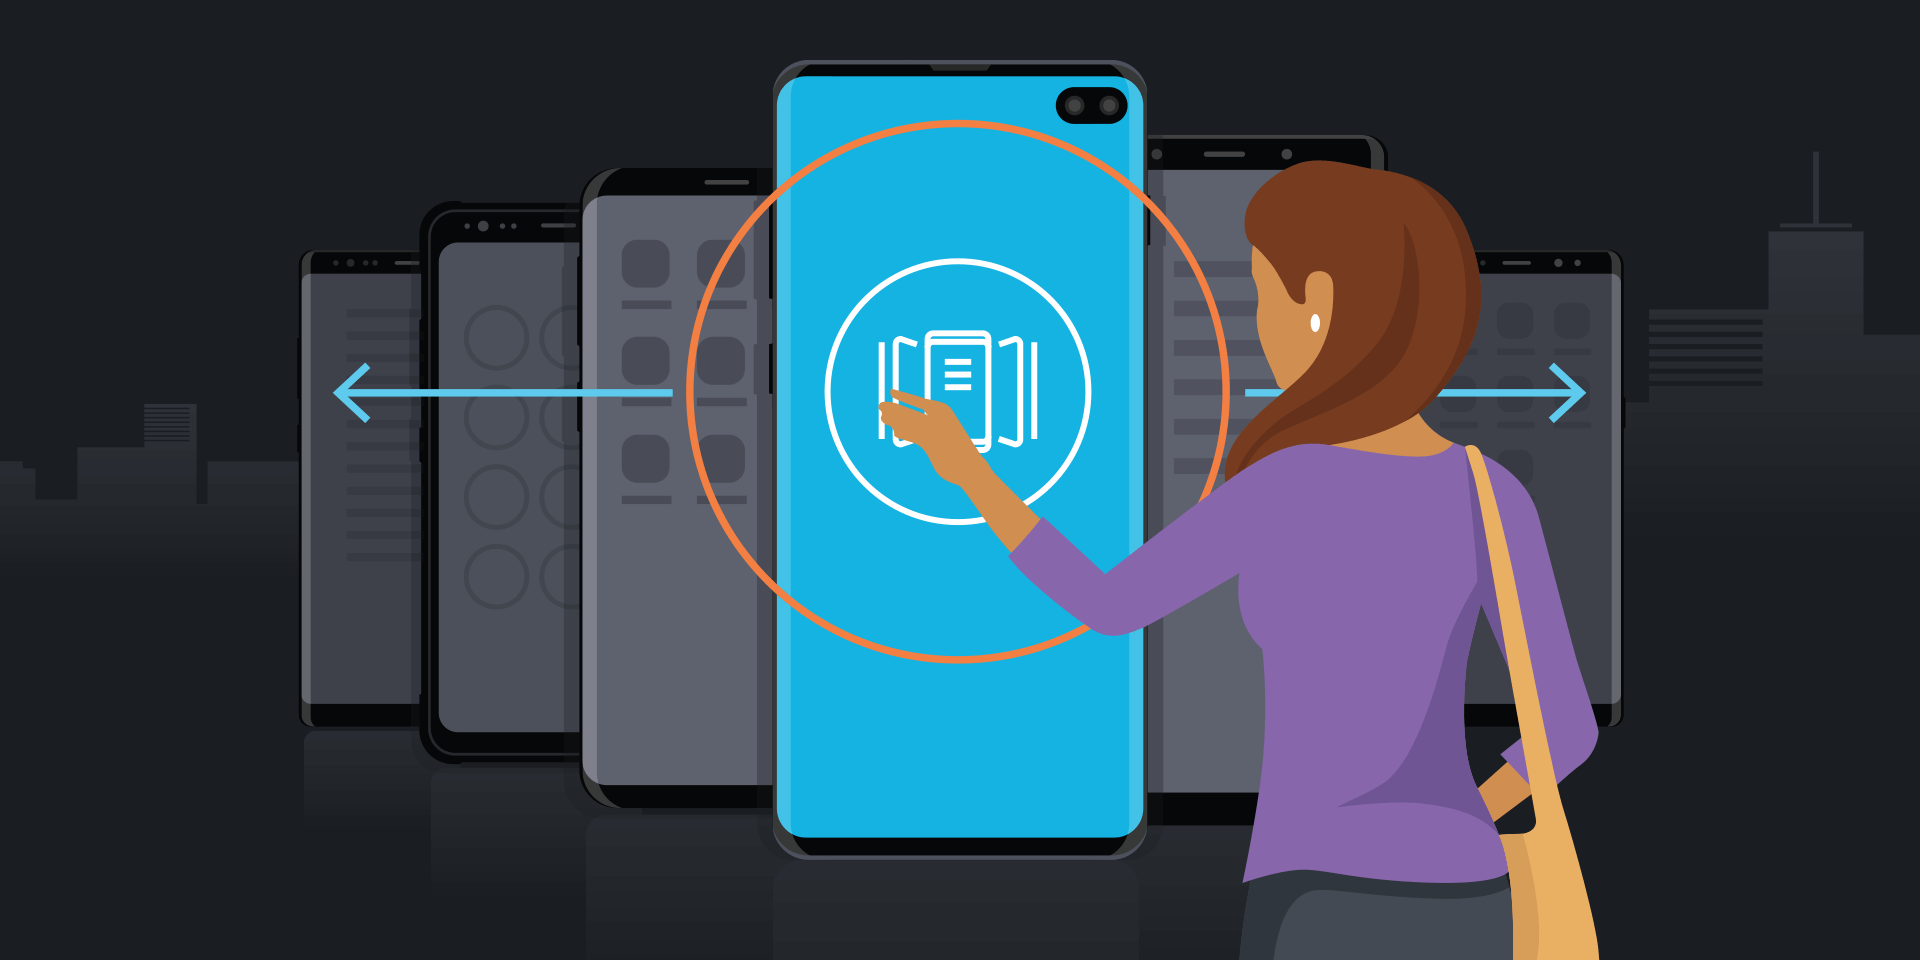 how to present powerpoint using phone